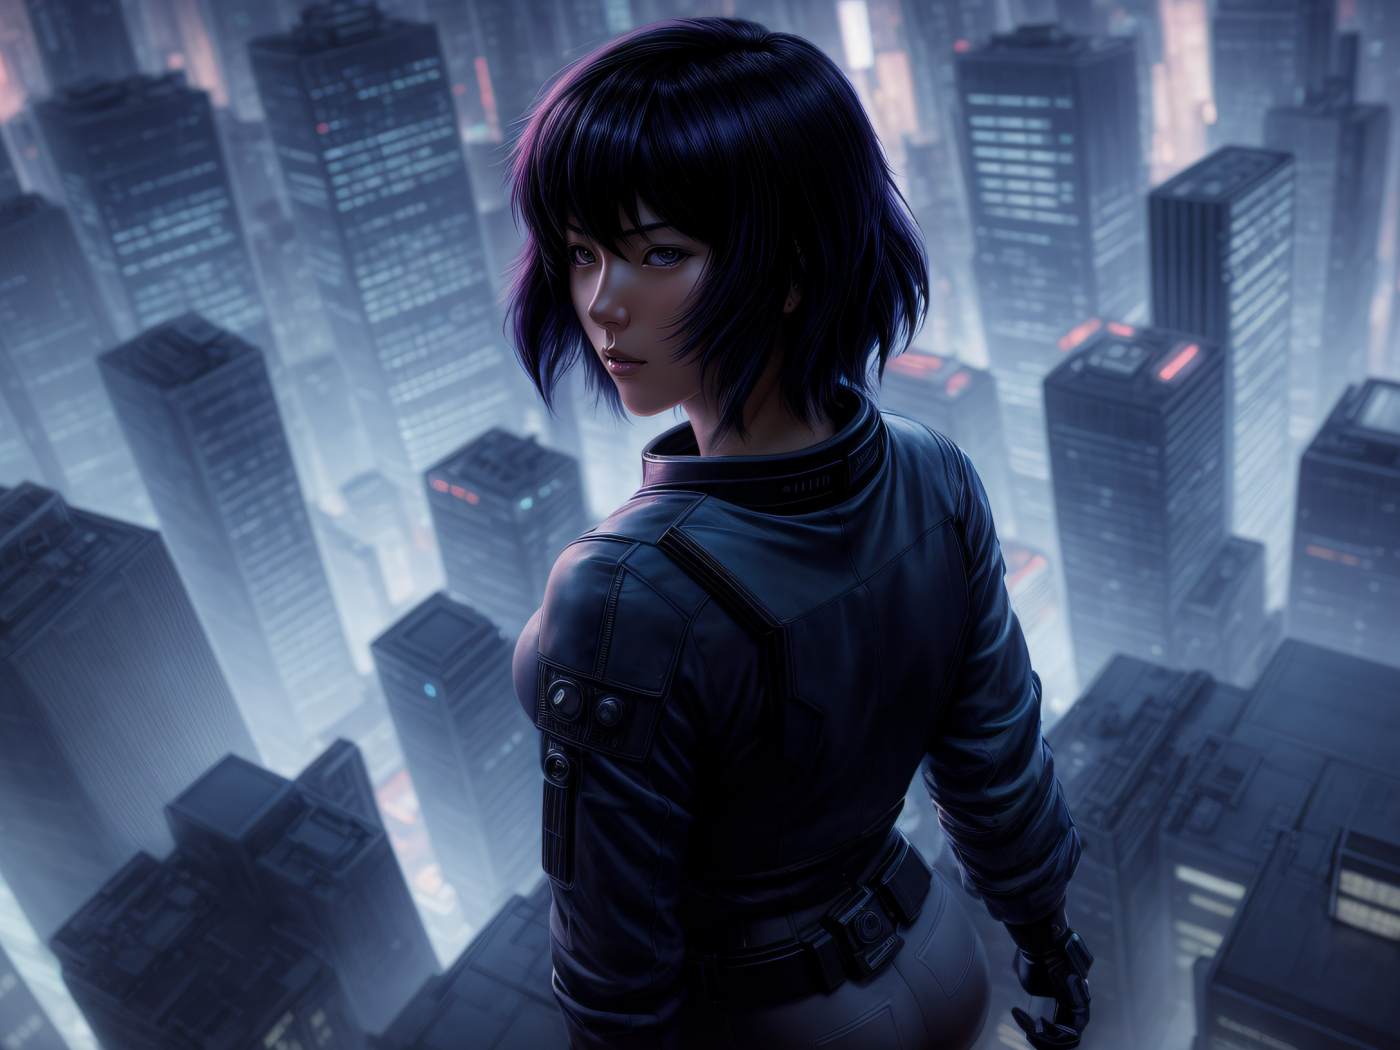 Beautiful girl, Ghost in the Shell, anime art, 1400x1050 wallpaper